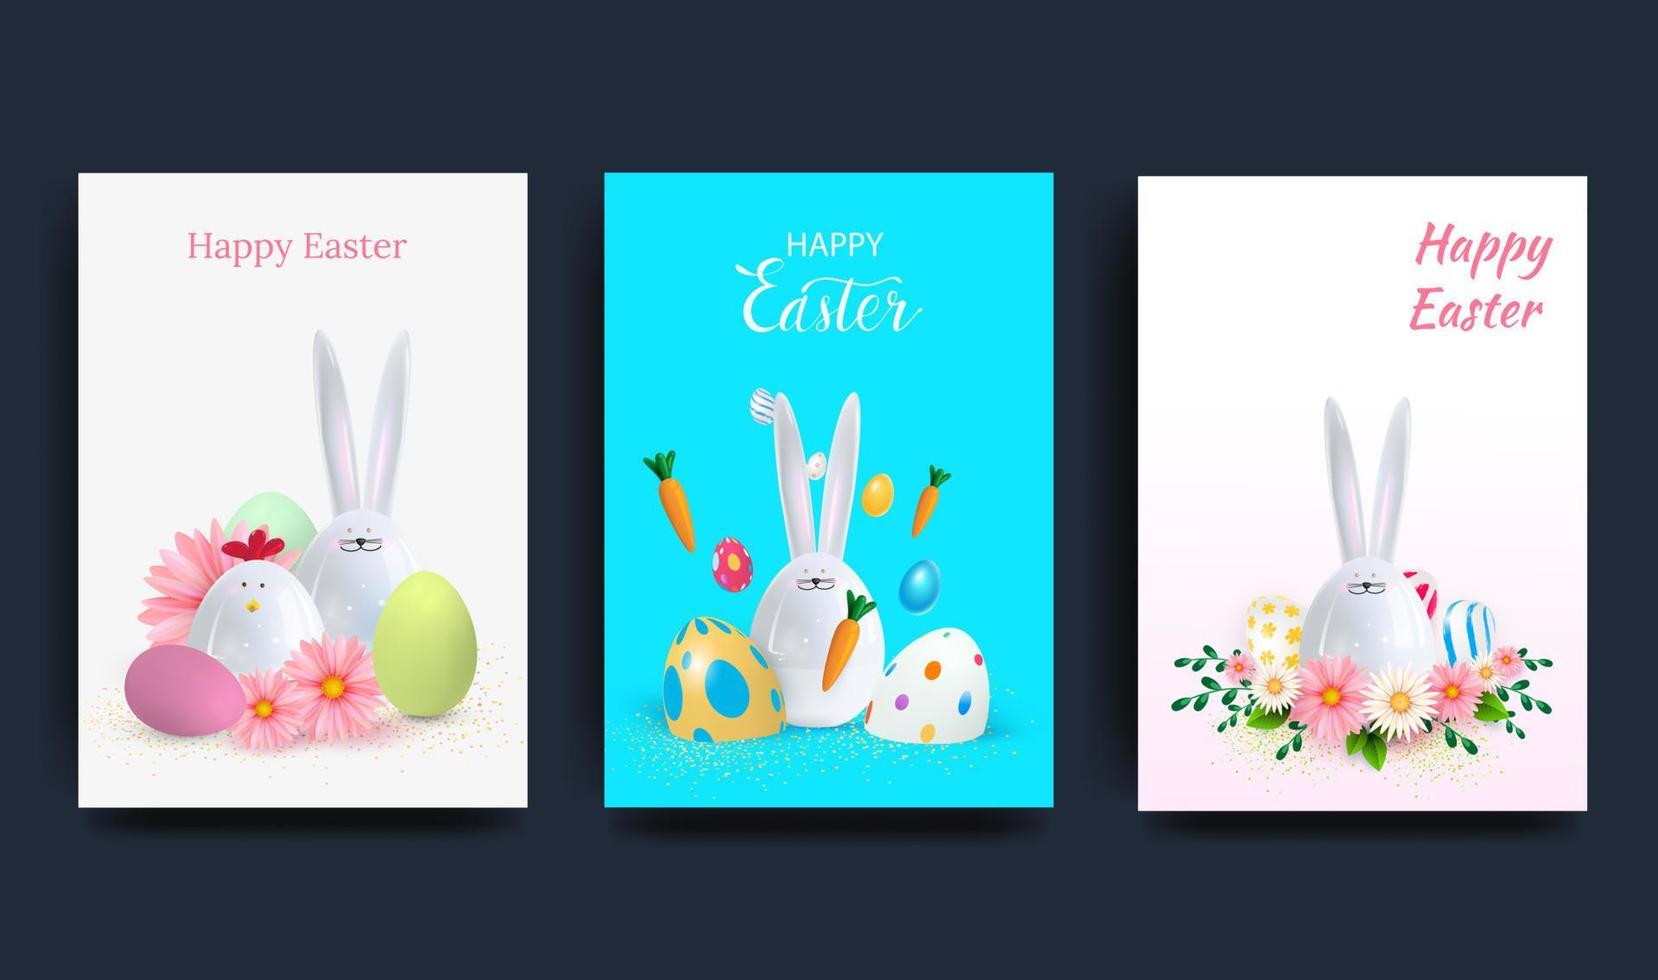 Easter Set of greeting cards, holiday covers, posters, flyers in 3d realistic style with golden egg and ceramic rabbit. Modern minimalist design for social media, sales, advertising, networking. vector